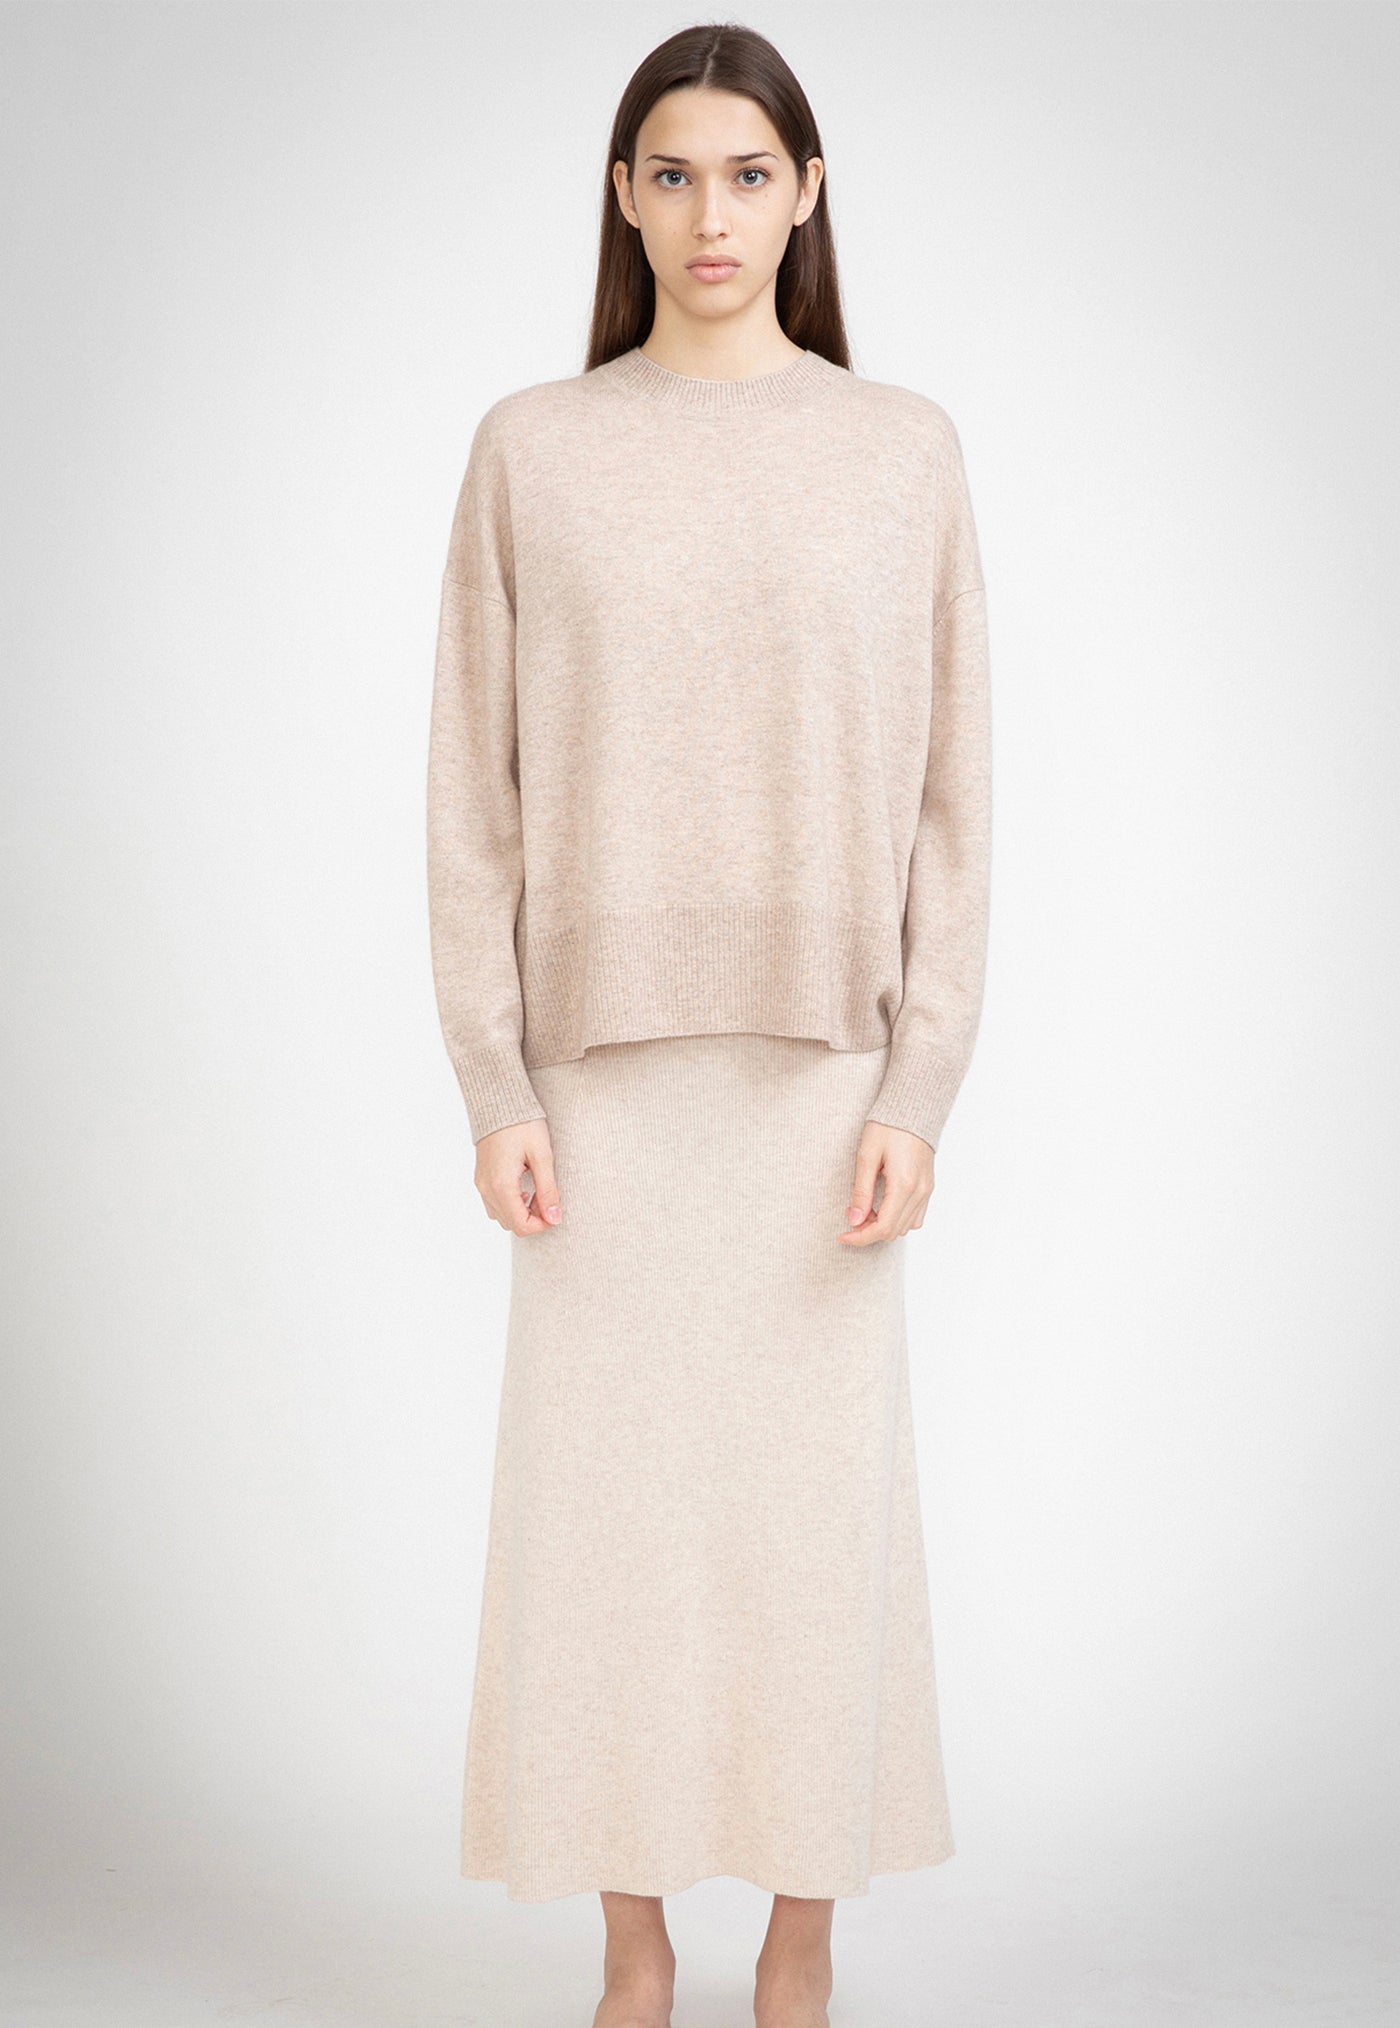 N.39 Cashmere High Low Hem Crew - Champagne sold by Angel Divine